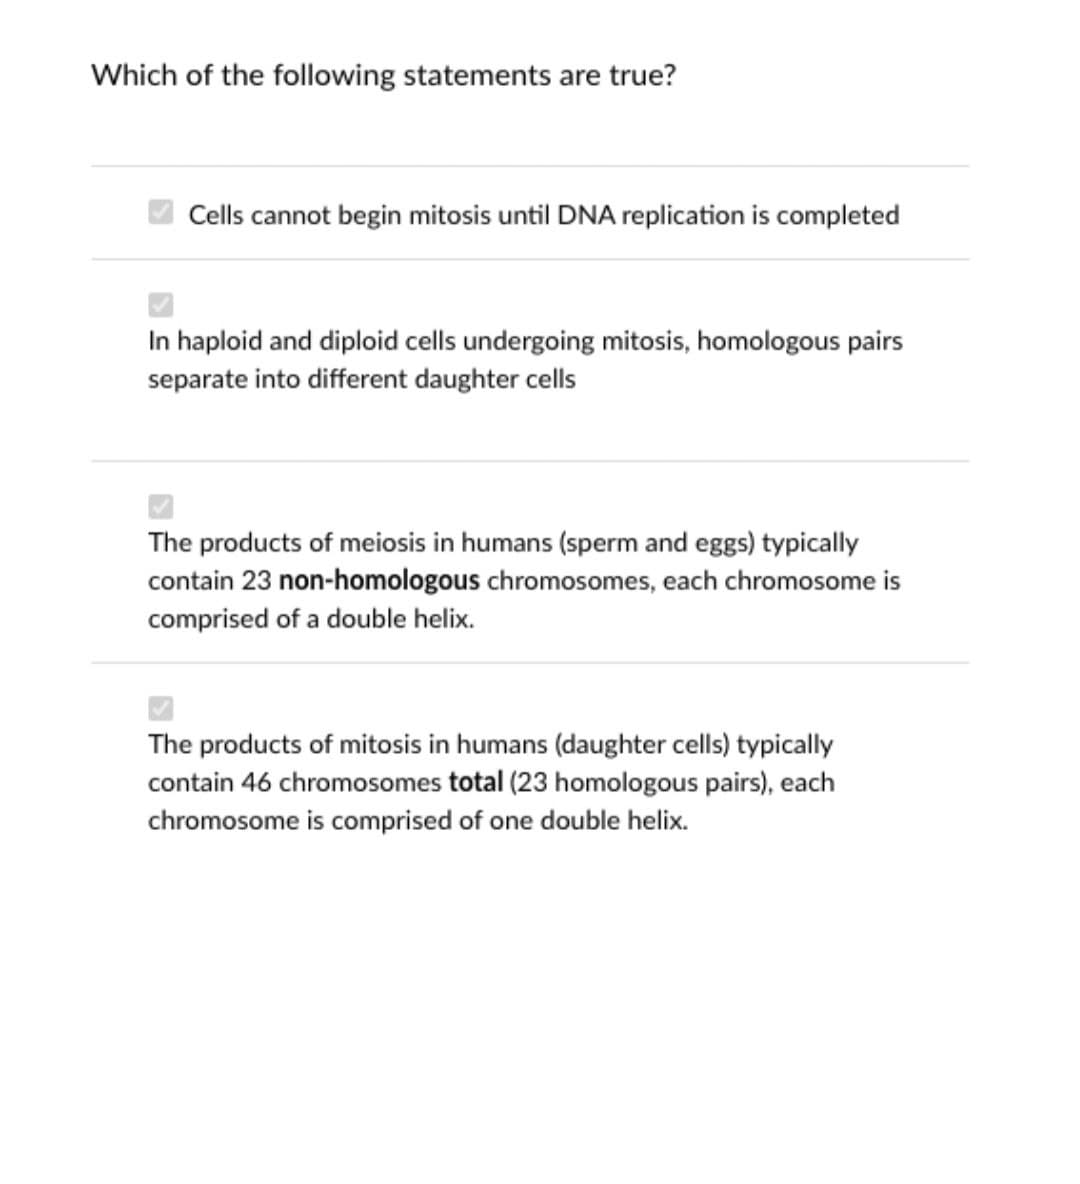 Which of the following statements are true?
Cells cannot begin mitosis until DNA replication is completed
In haploid and diploid cells undergoing mitosis, homologous pairs
separate into different daughter cells
The products of meiosis in humans (sperm and eggs) typically
contain 23 non-homologous chromosomes, each chromosome is
comprised of a double helix.
The products of mitosis in humans (daughter cells) typicaly
contain 46 chromosomes total (23 homologous pairs), each
chromosome is comprised of one double helix.
